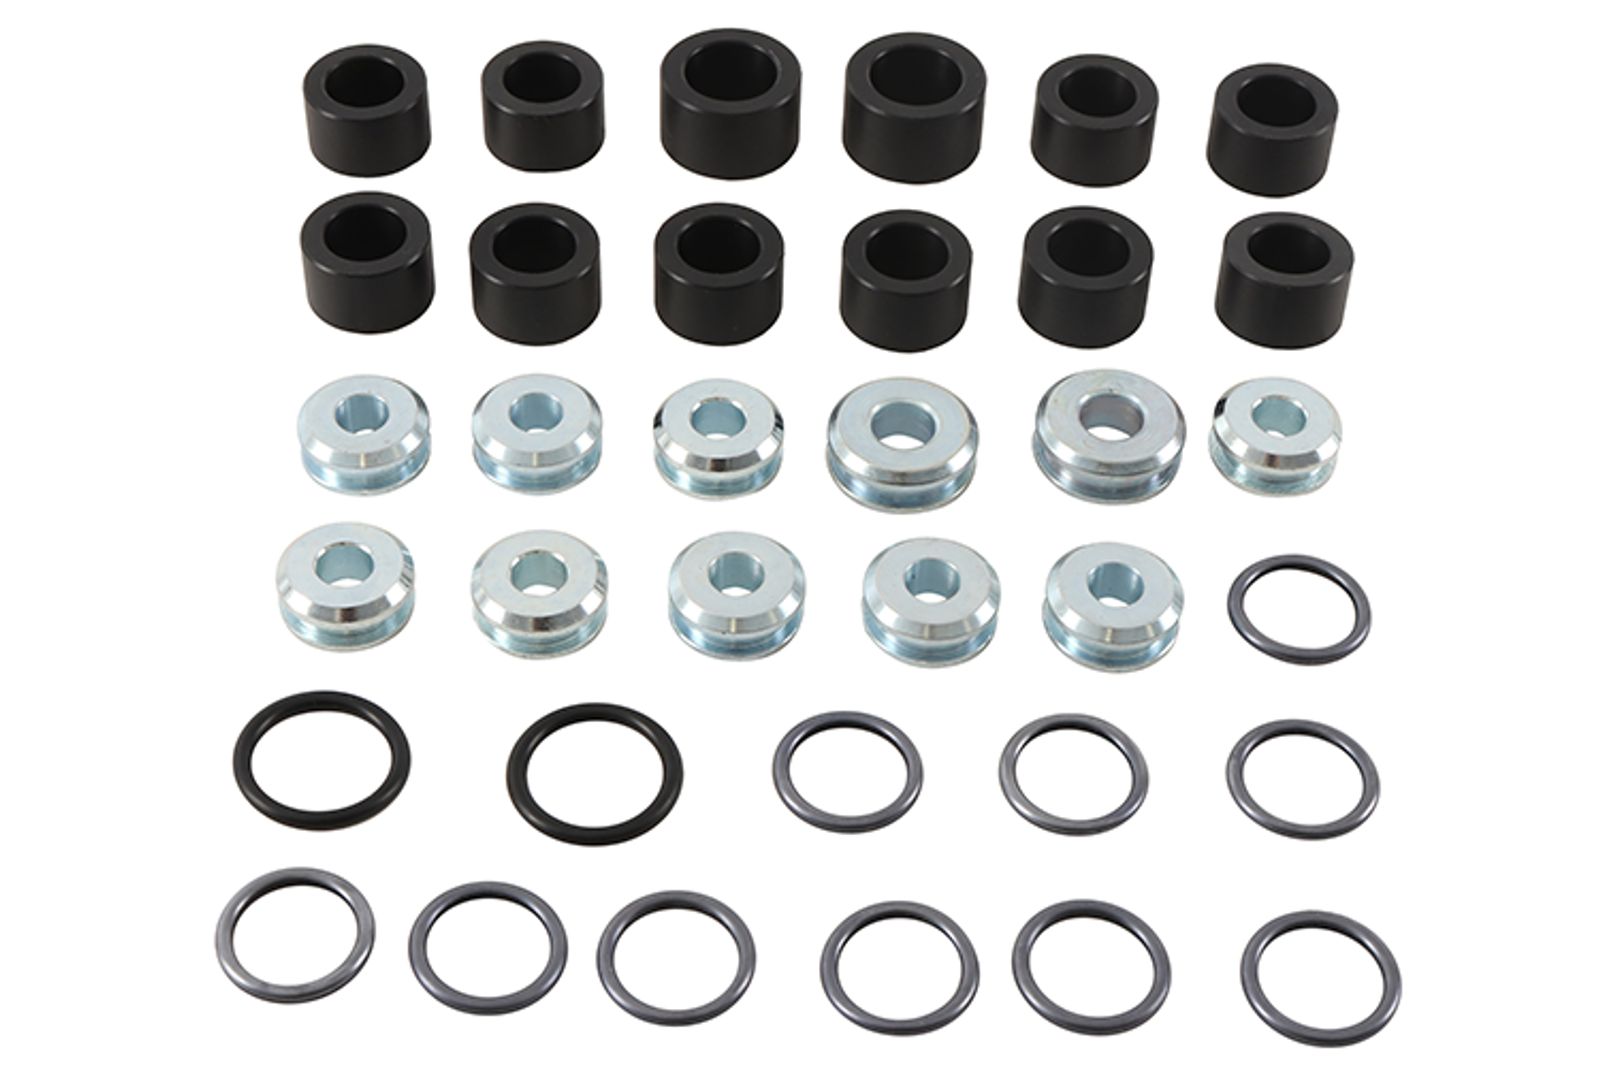 Wrp Rear Ind. Suspension Kits - WRP501202 image